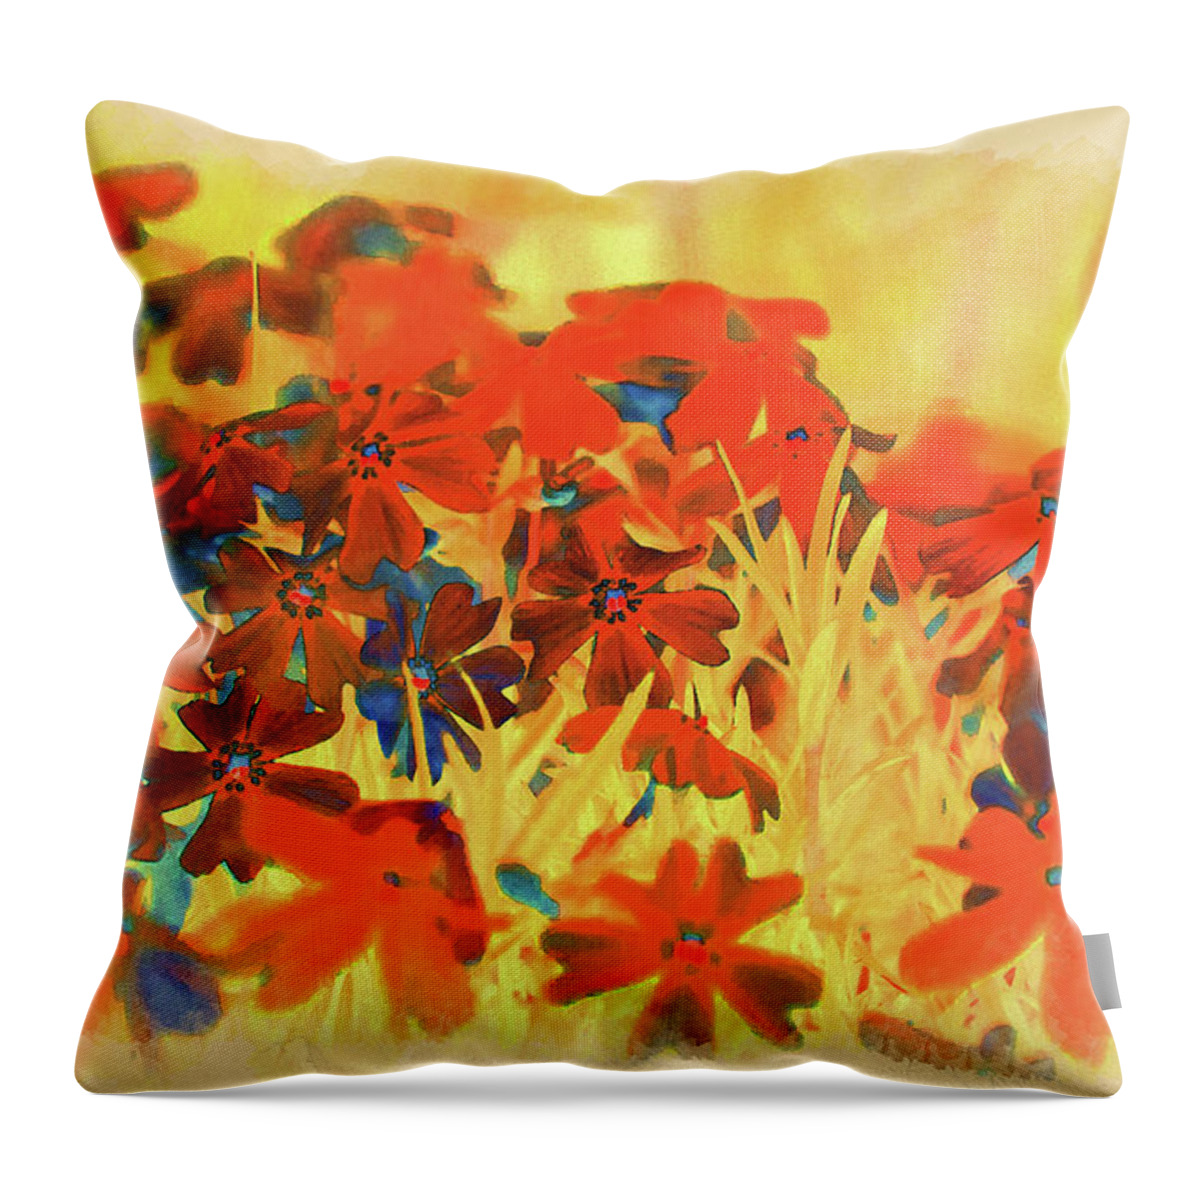 Fall Throw Pillow featuring the digital art Fall Colors by Alex Mir